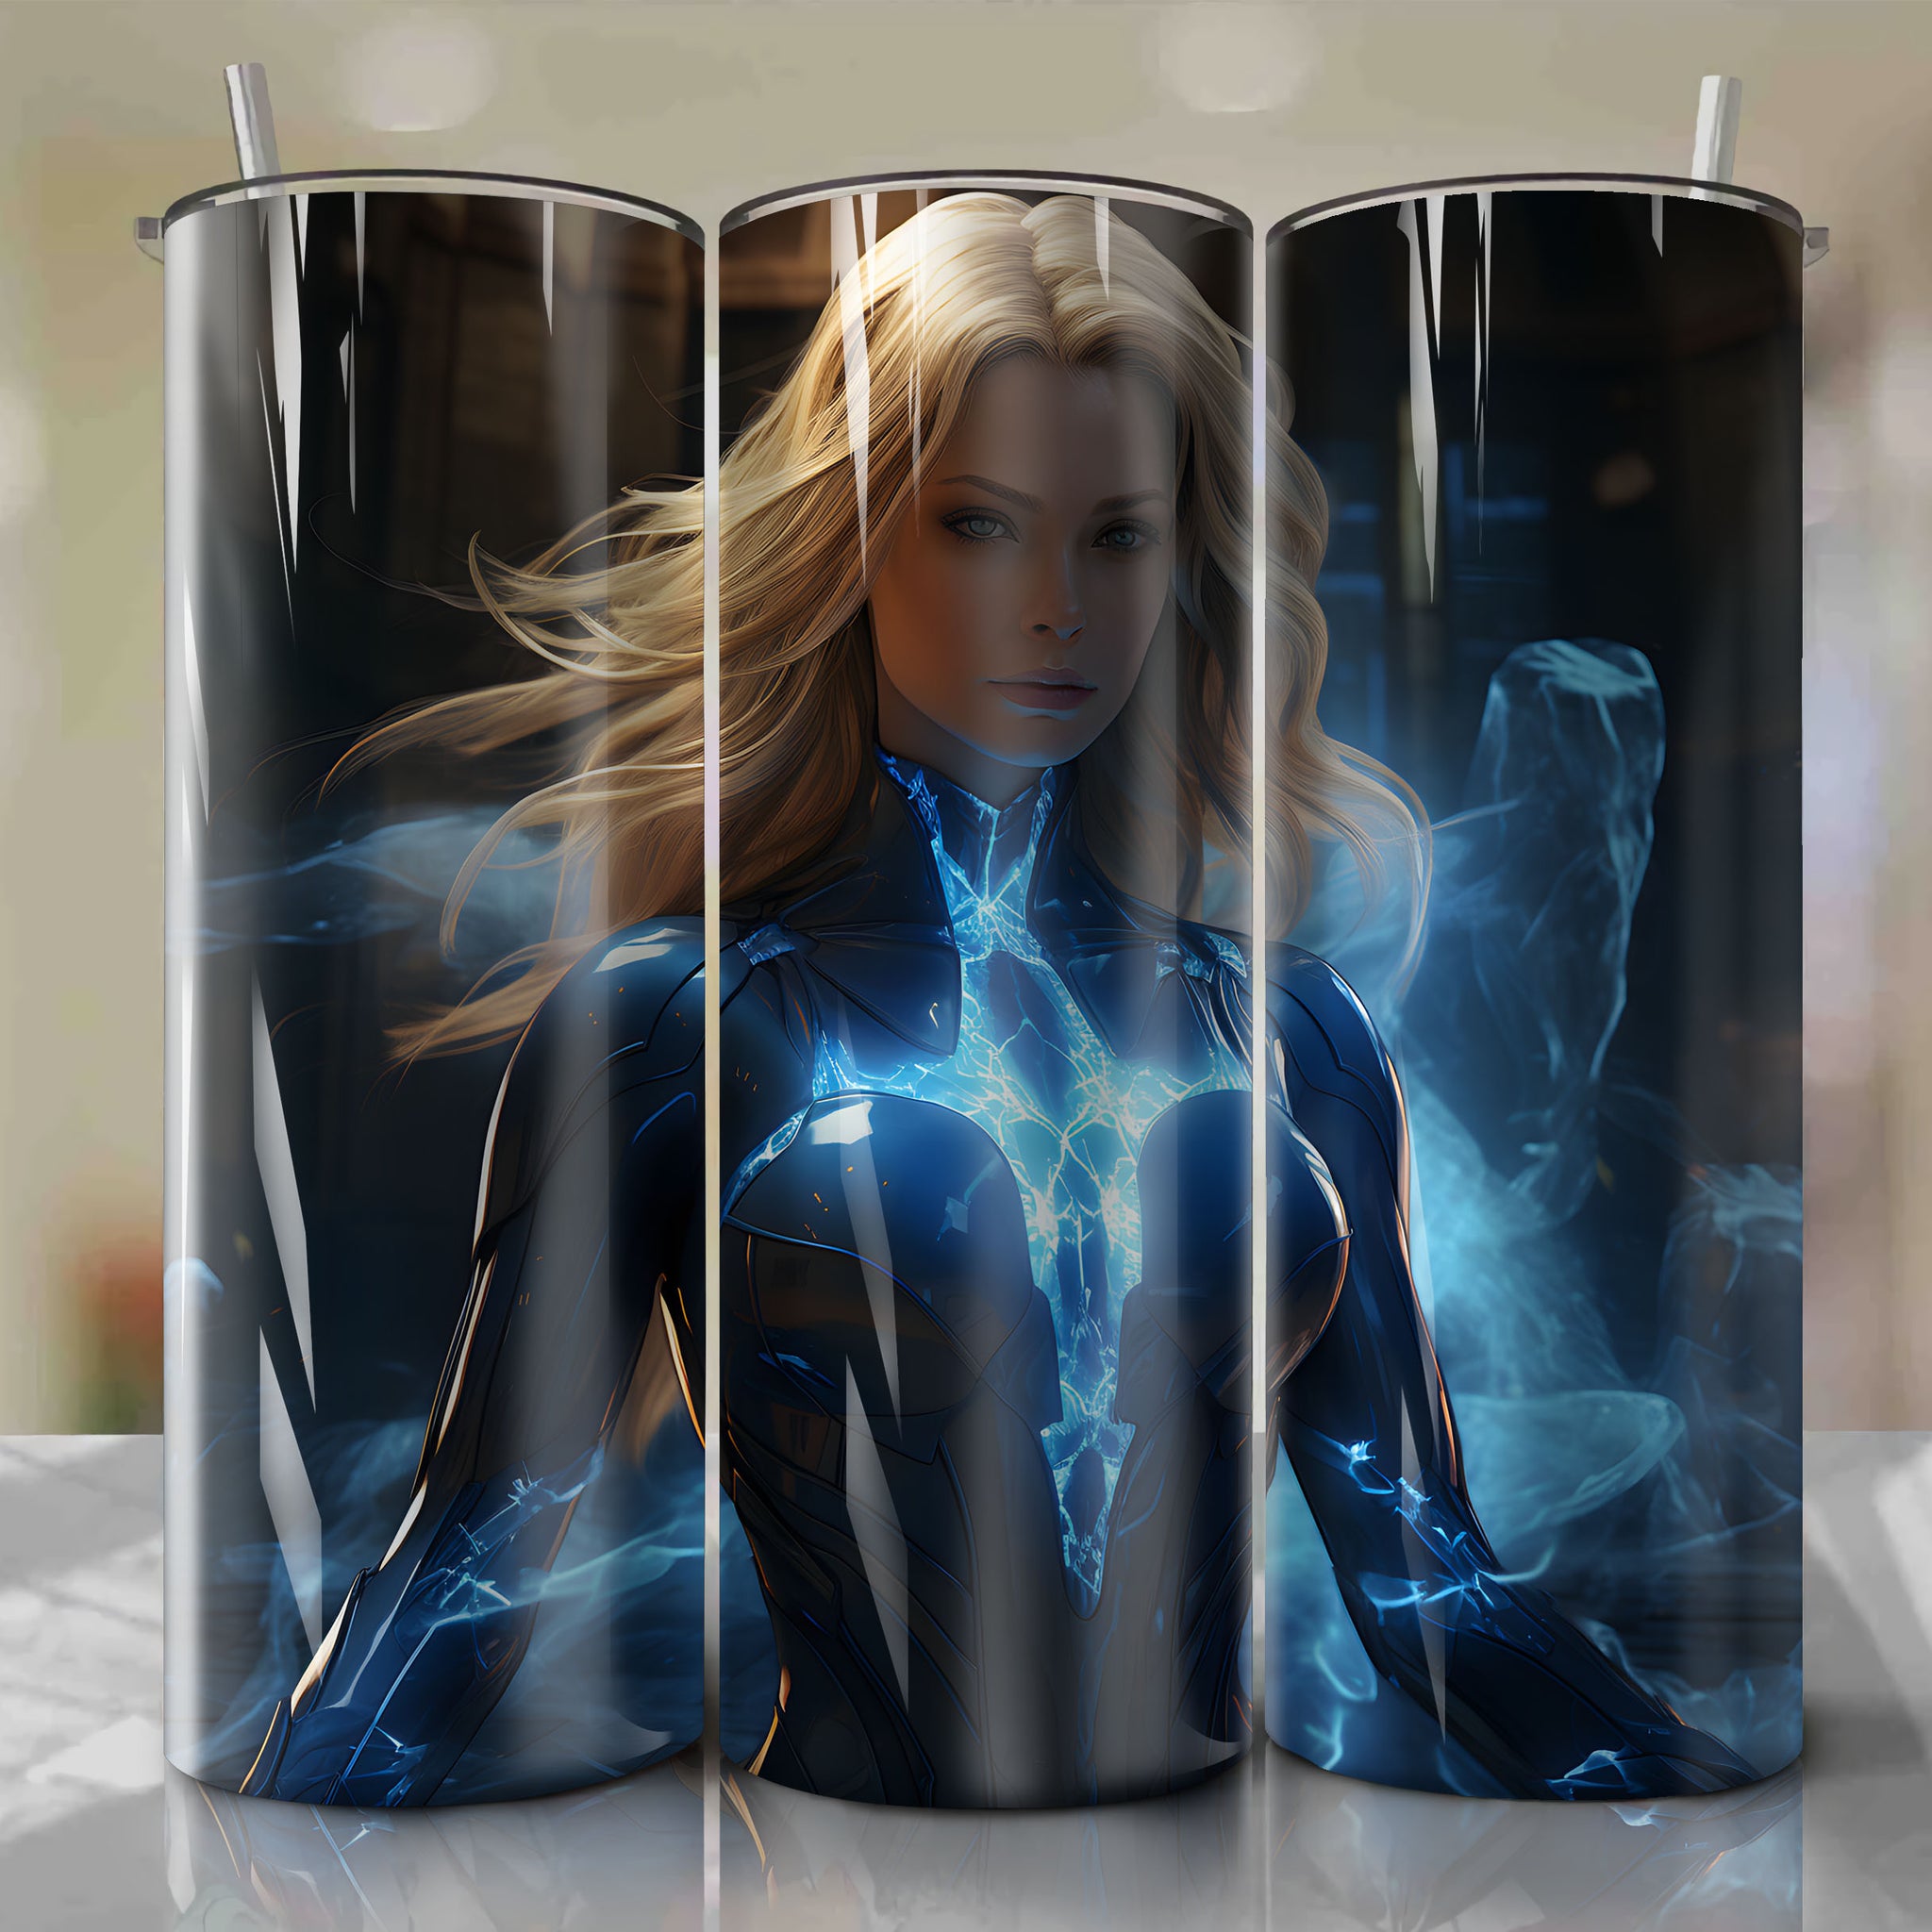 20 Oz Tumbler Wrap - Invisible Woman's Grace and Protective Strength in Stunning Artwork
